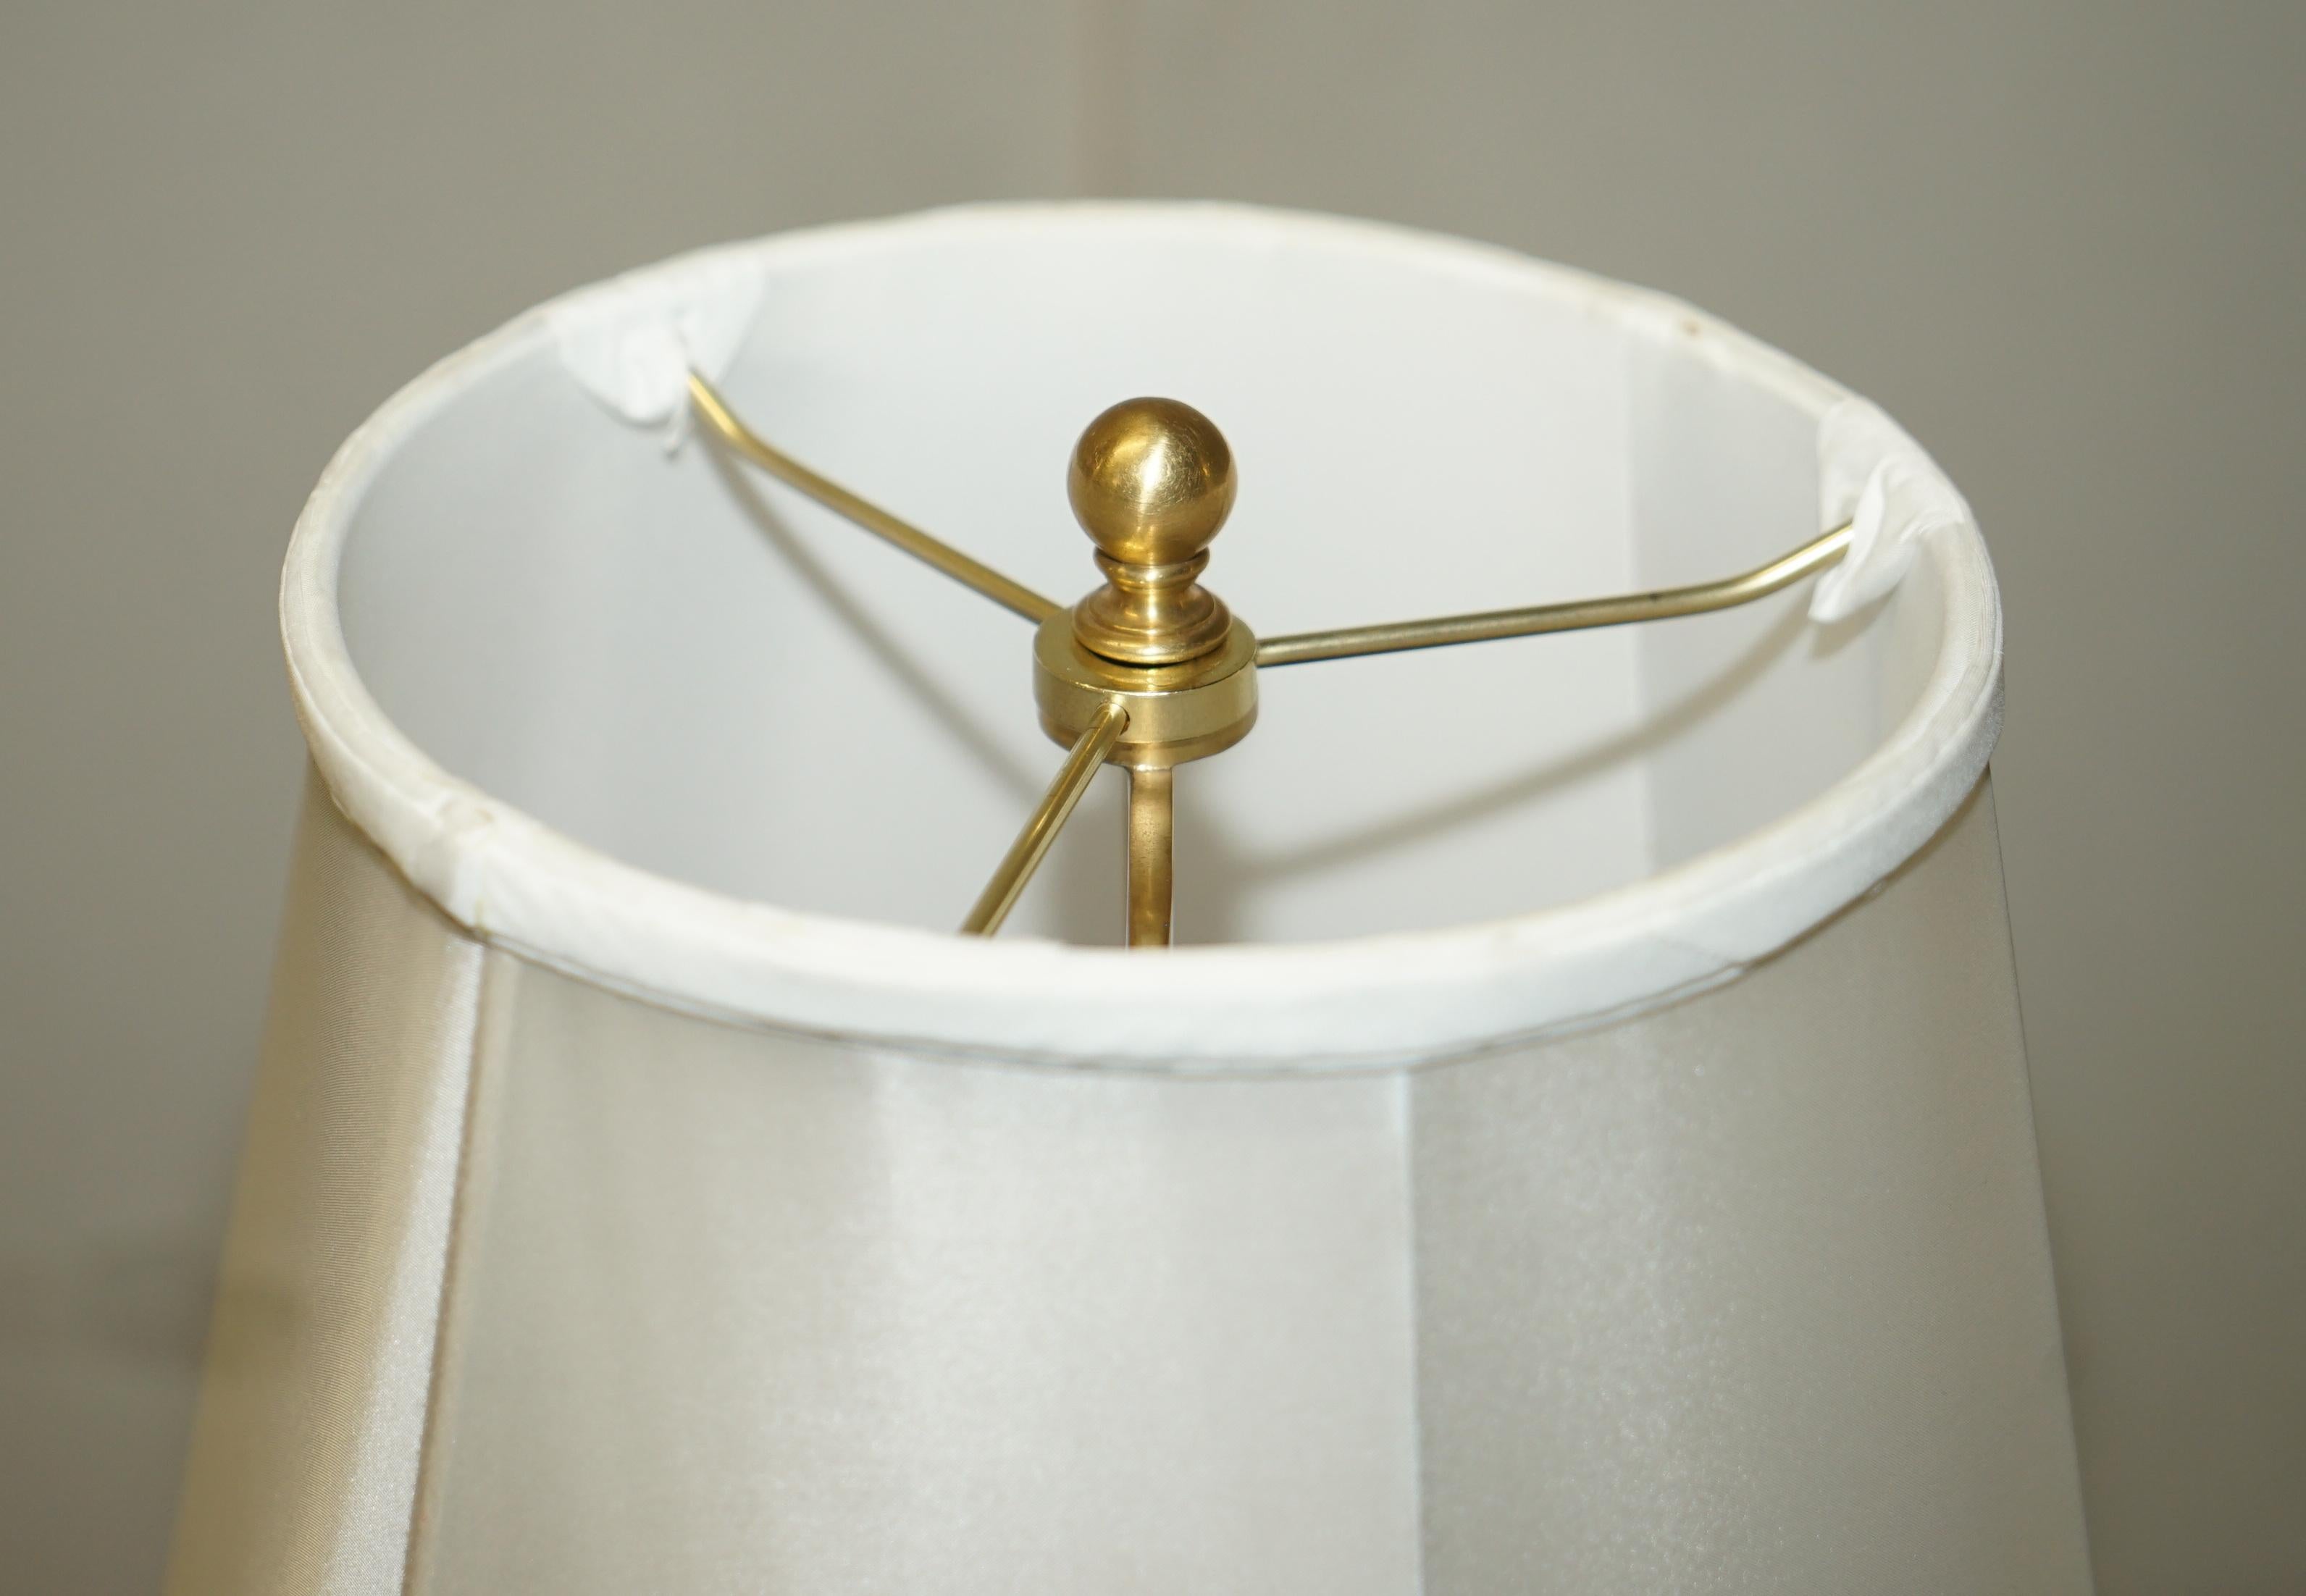 We are delighted to offer for sale this lovely tall brand new Ralph Lauren Home brass bobbin turned lamp with shade

A good looking and decorative lamp, it is brand new, only used in a show home, the bulbs are not included

This lamp is based on